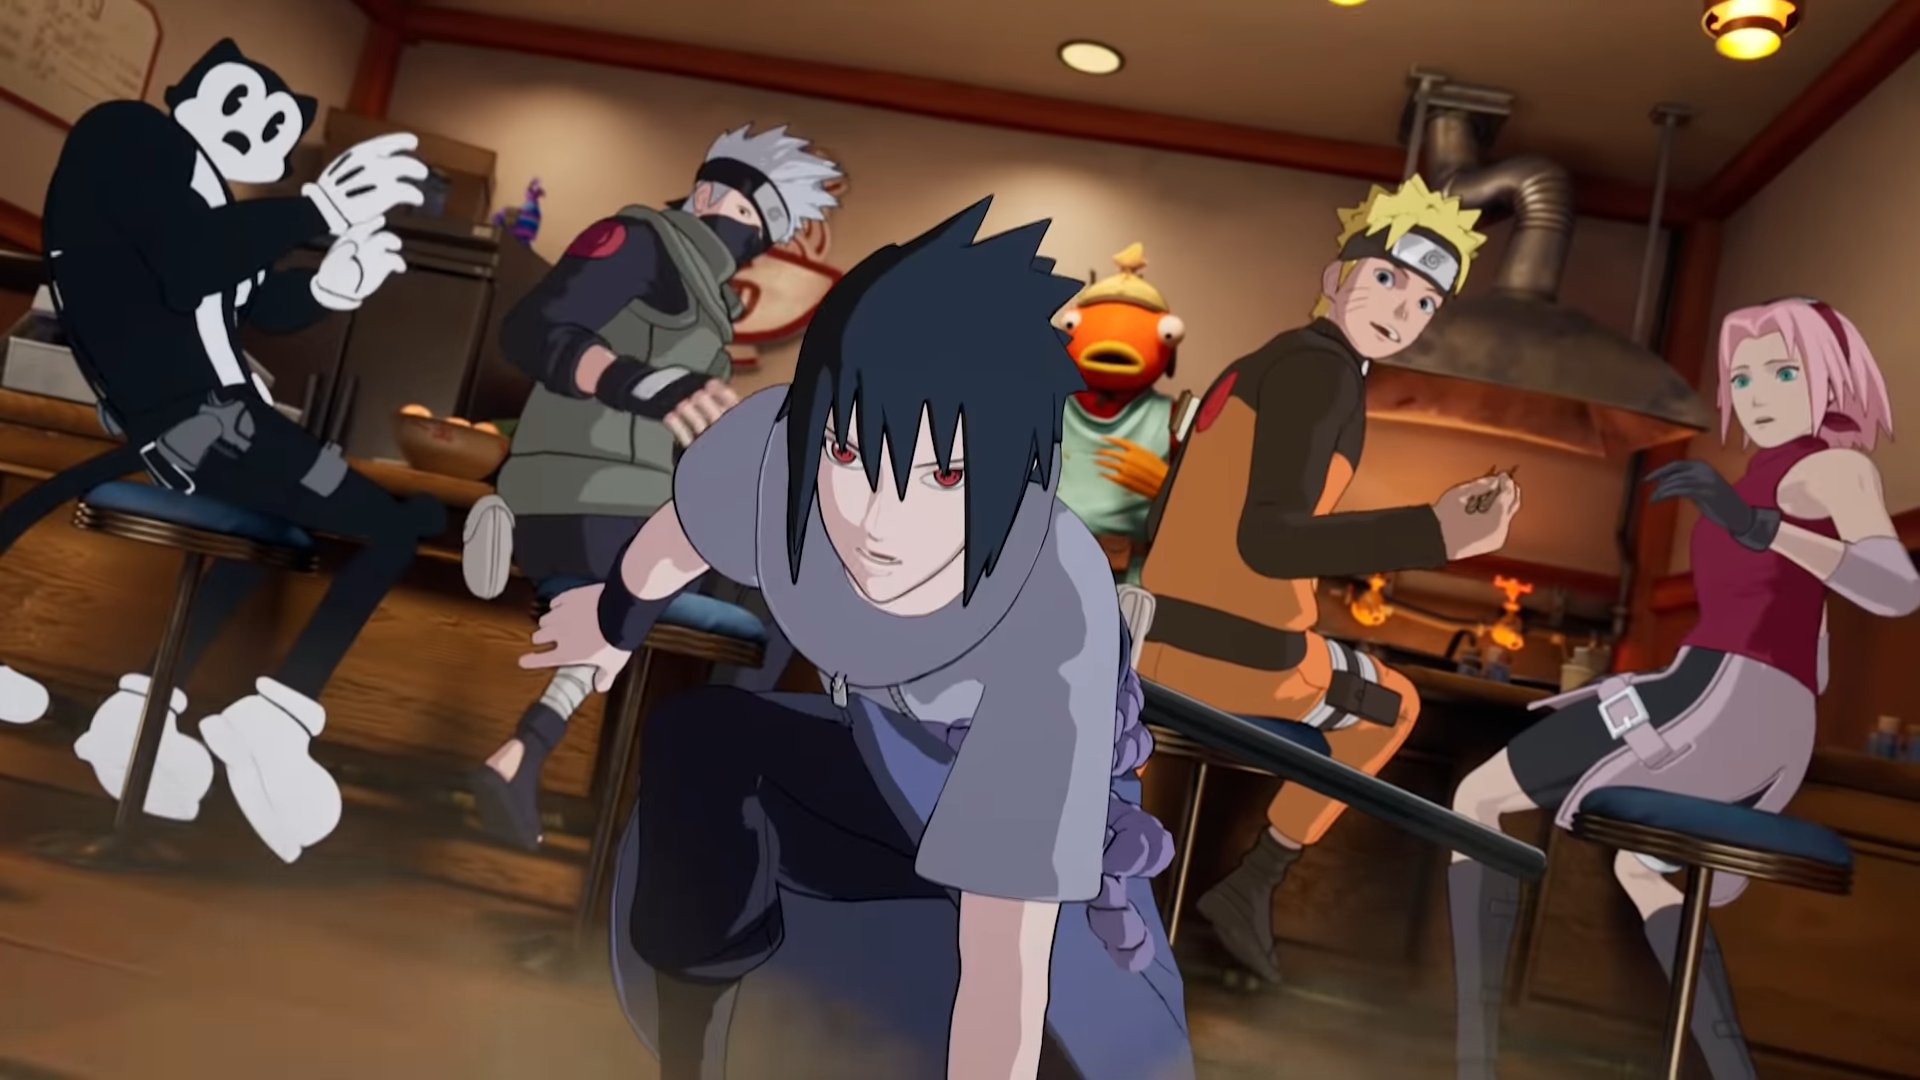 Now play as Naruto's Staff 7 in Fortnite Gamer AG